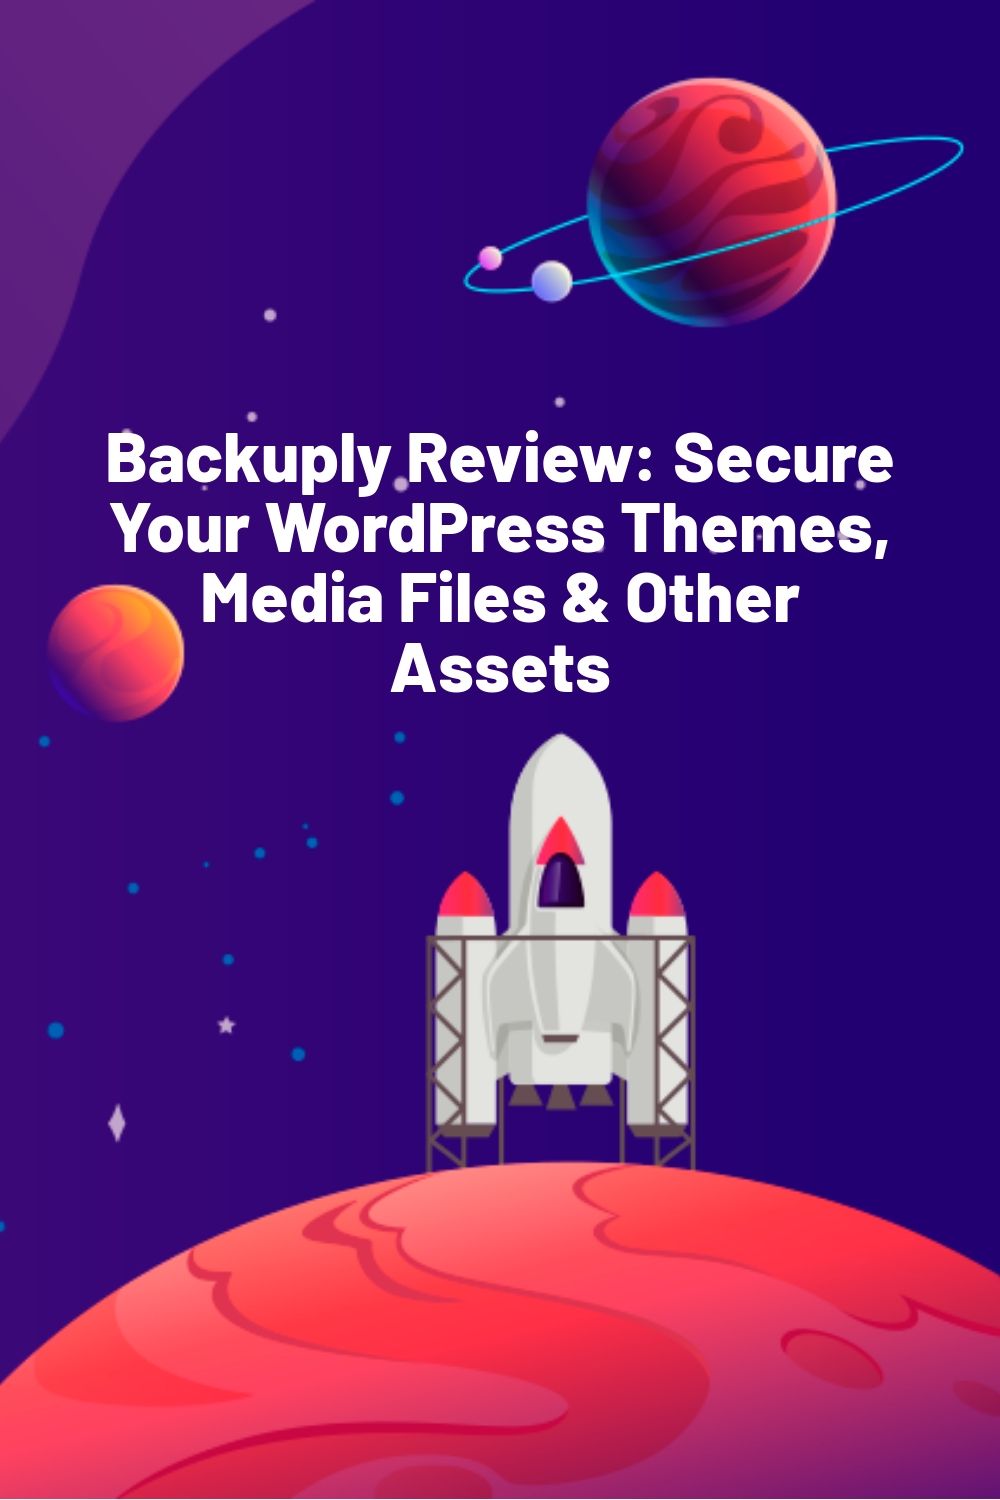 Backuply Review: Secure Your WordPress Themes, Media Files & Other Assets